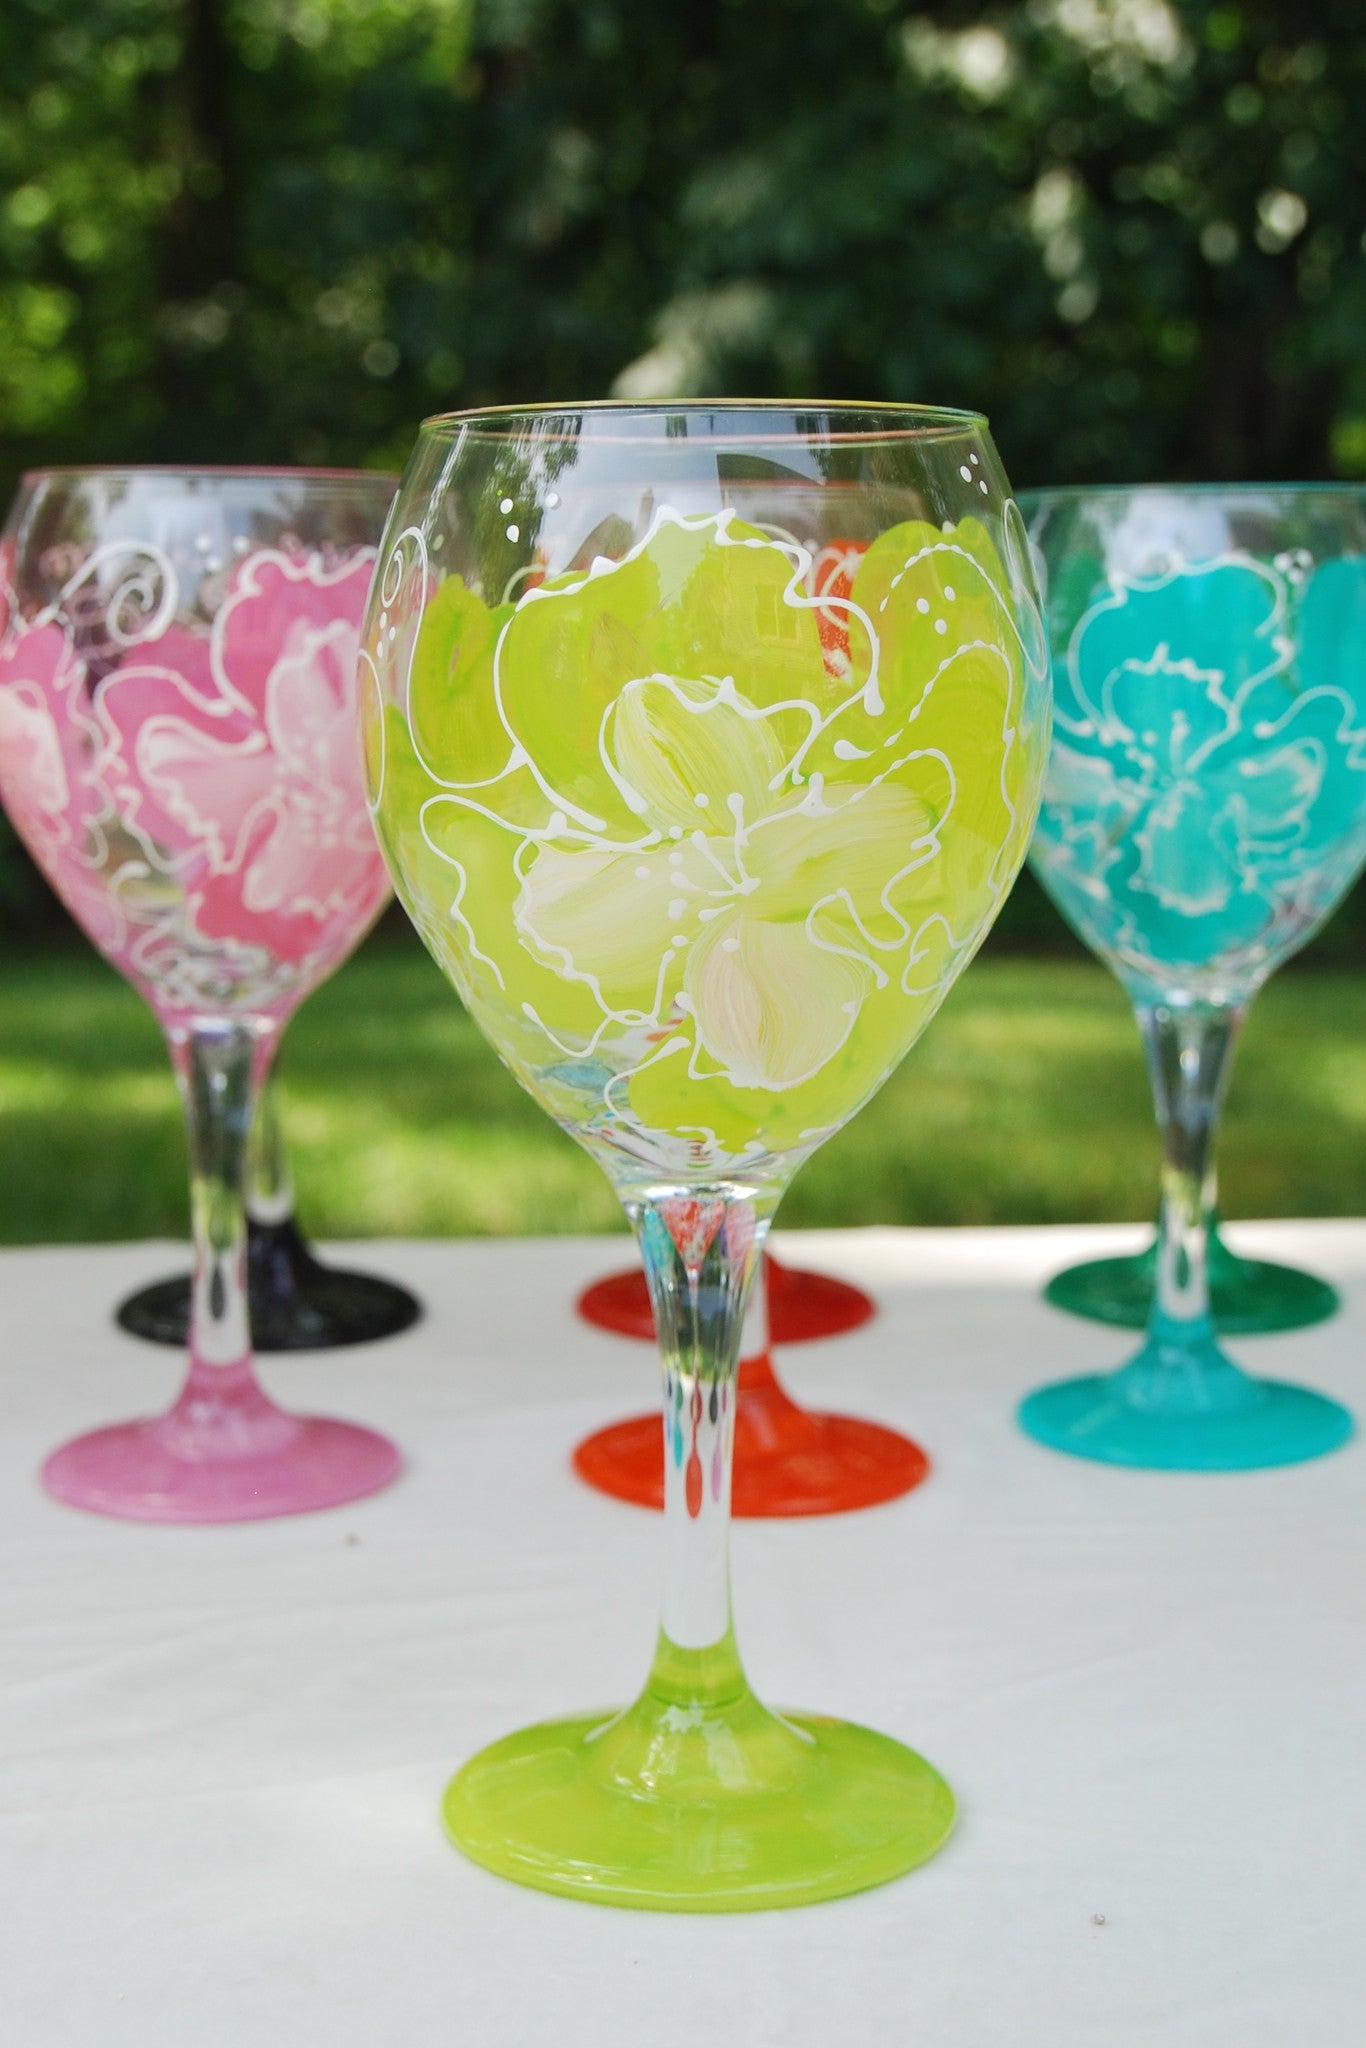 Poinsettia Hand-painted Glassware – Glorious Goblets